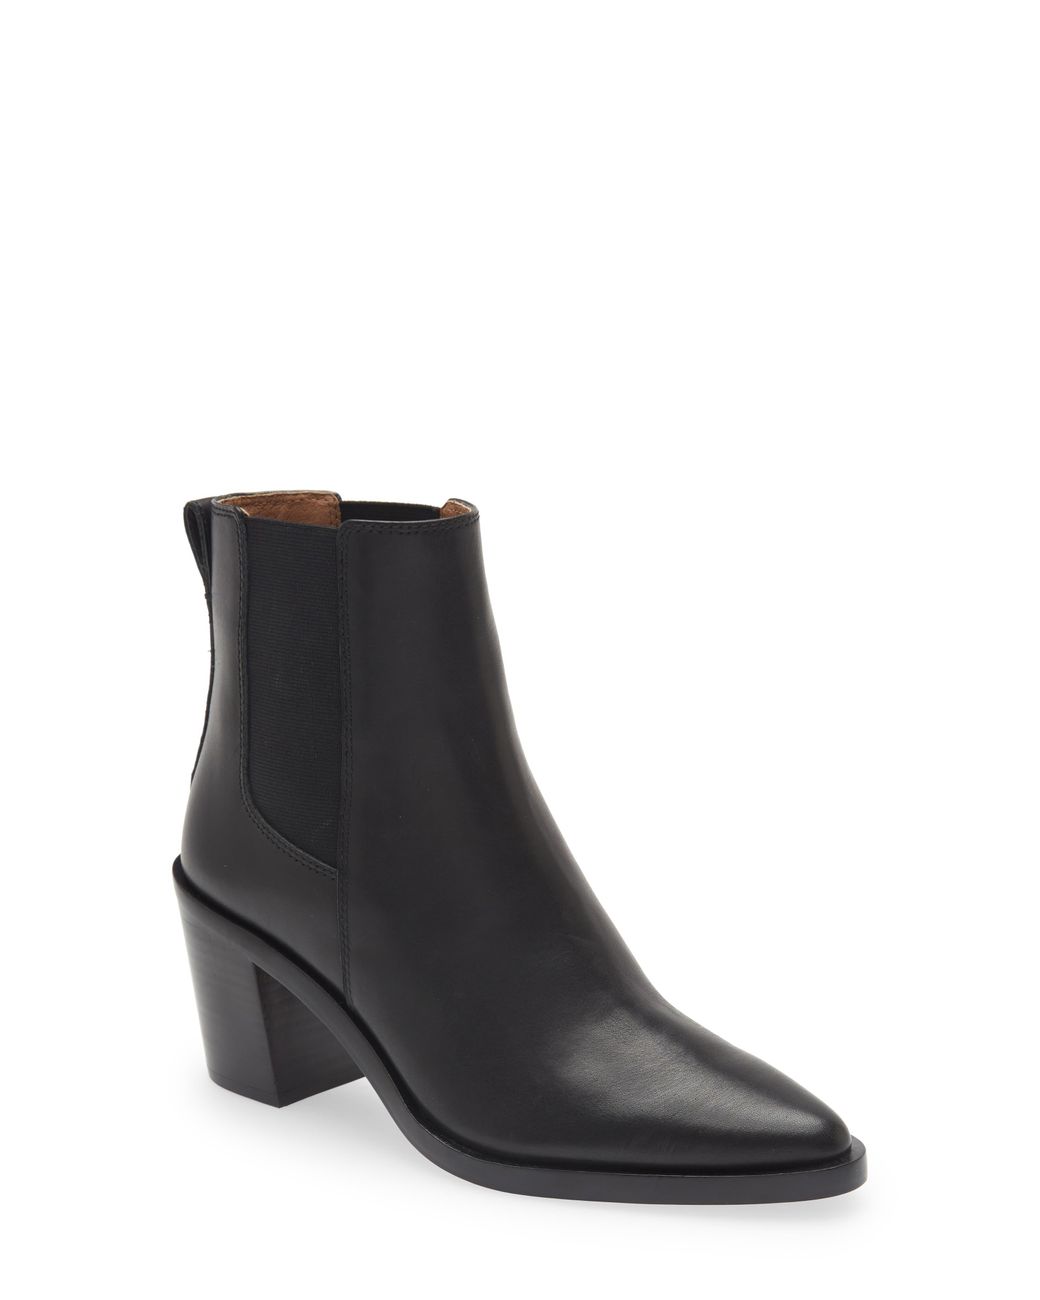 Madewell The Elspeth Chelsea Boot in Black Lyst